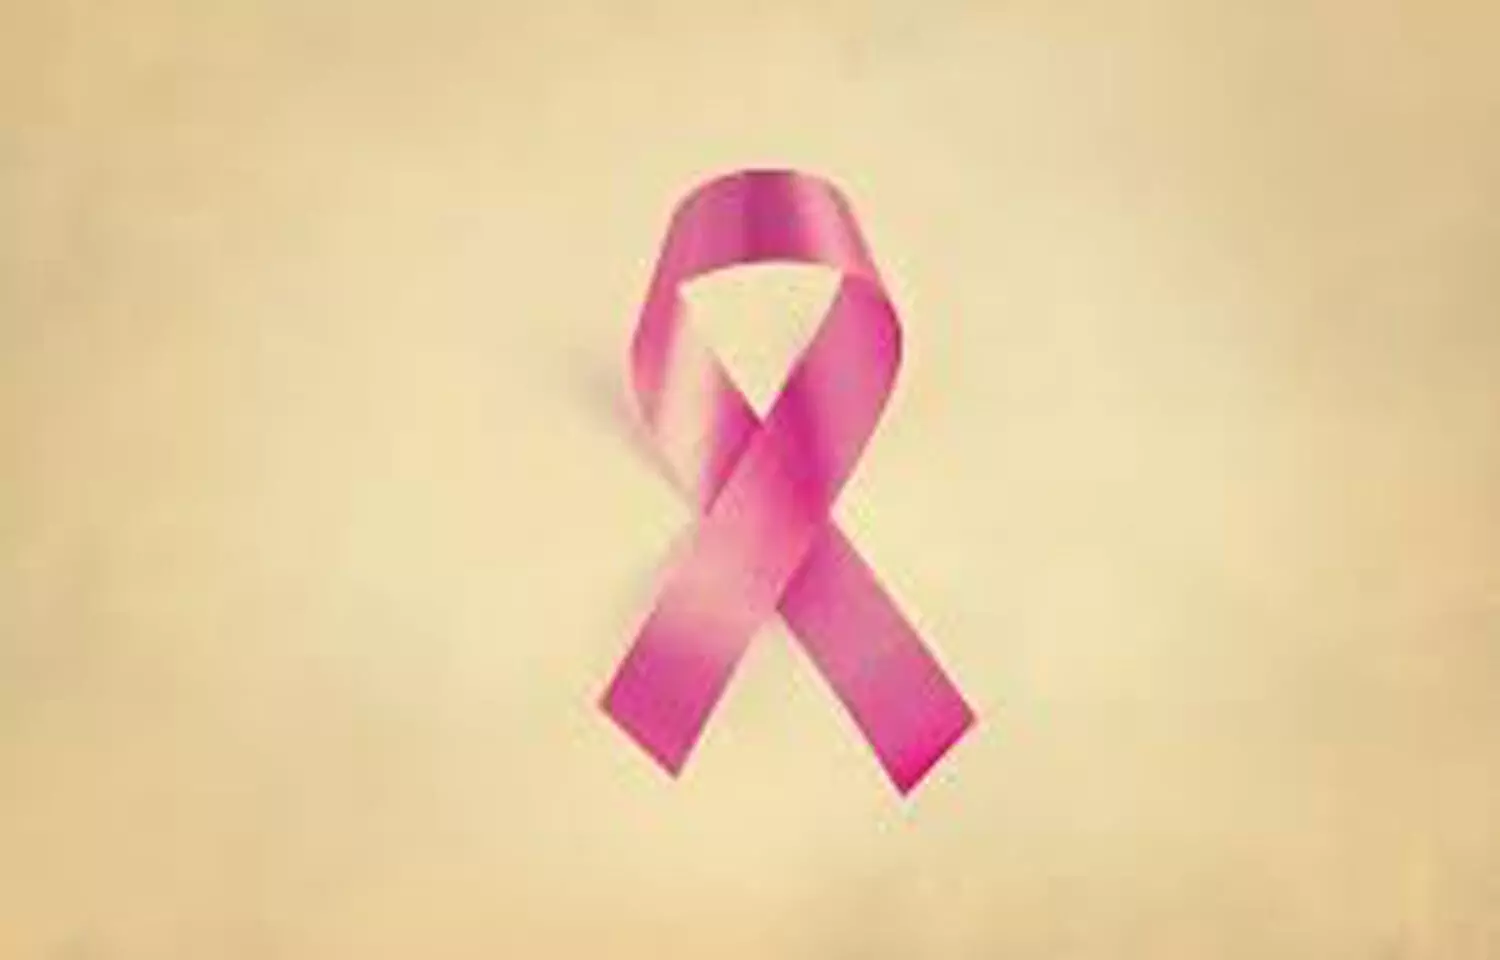 Researchers report novel findings for breast cancer patients with obesity, diabetes